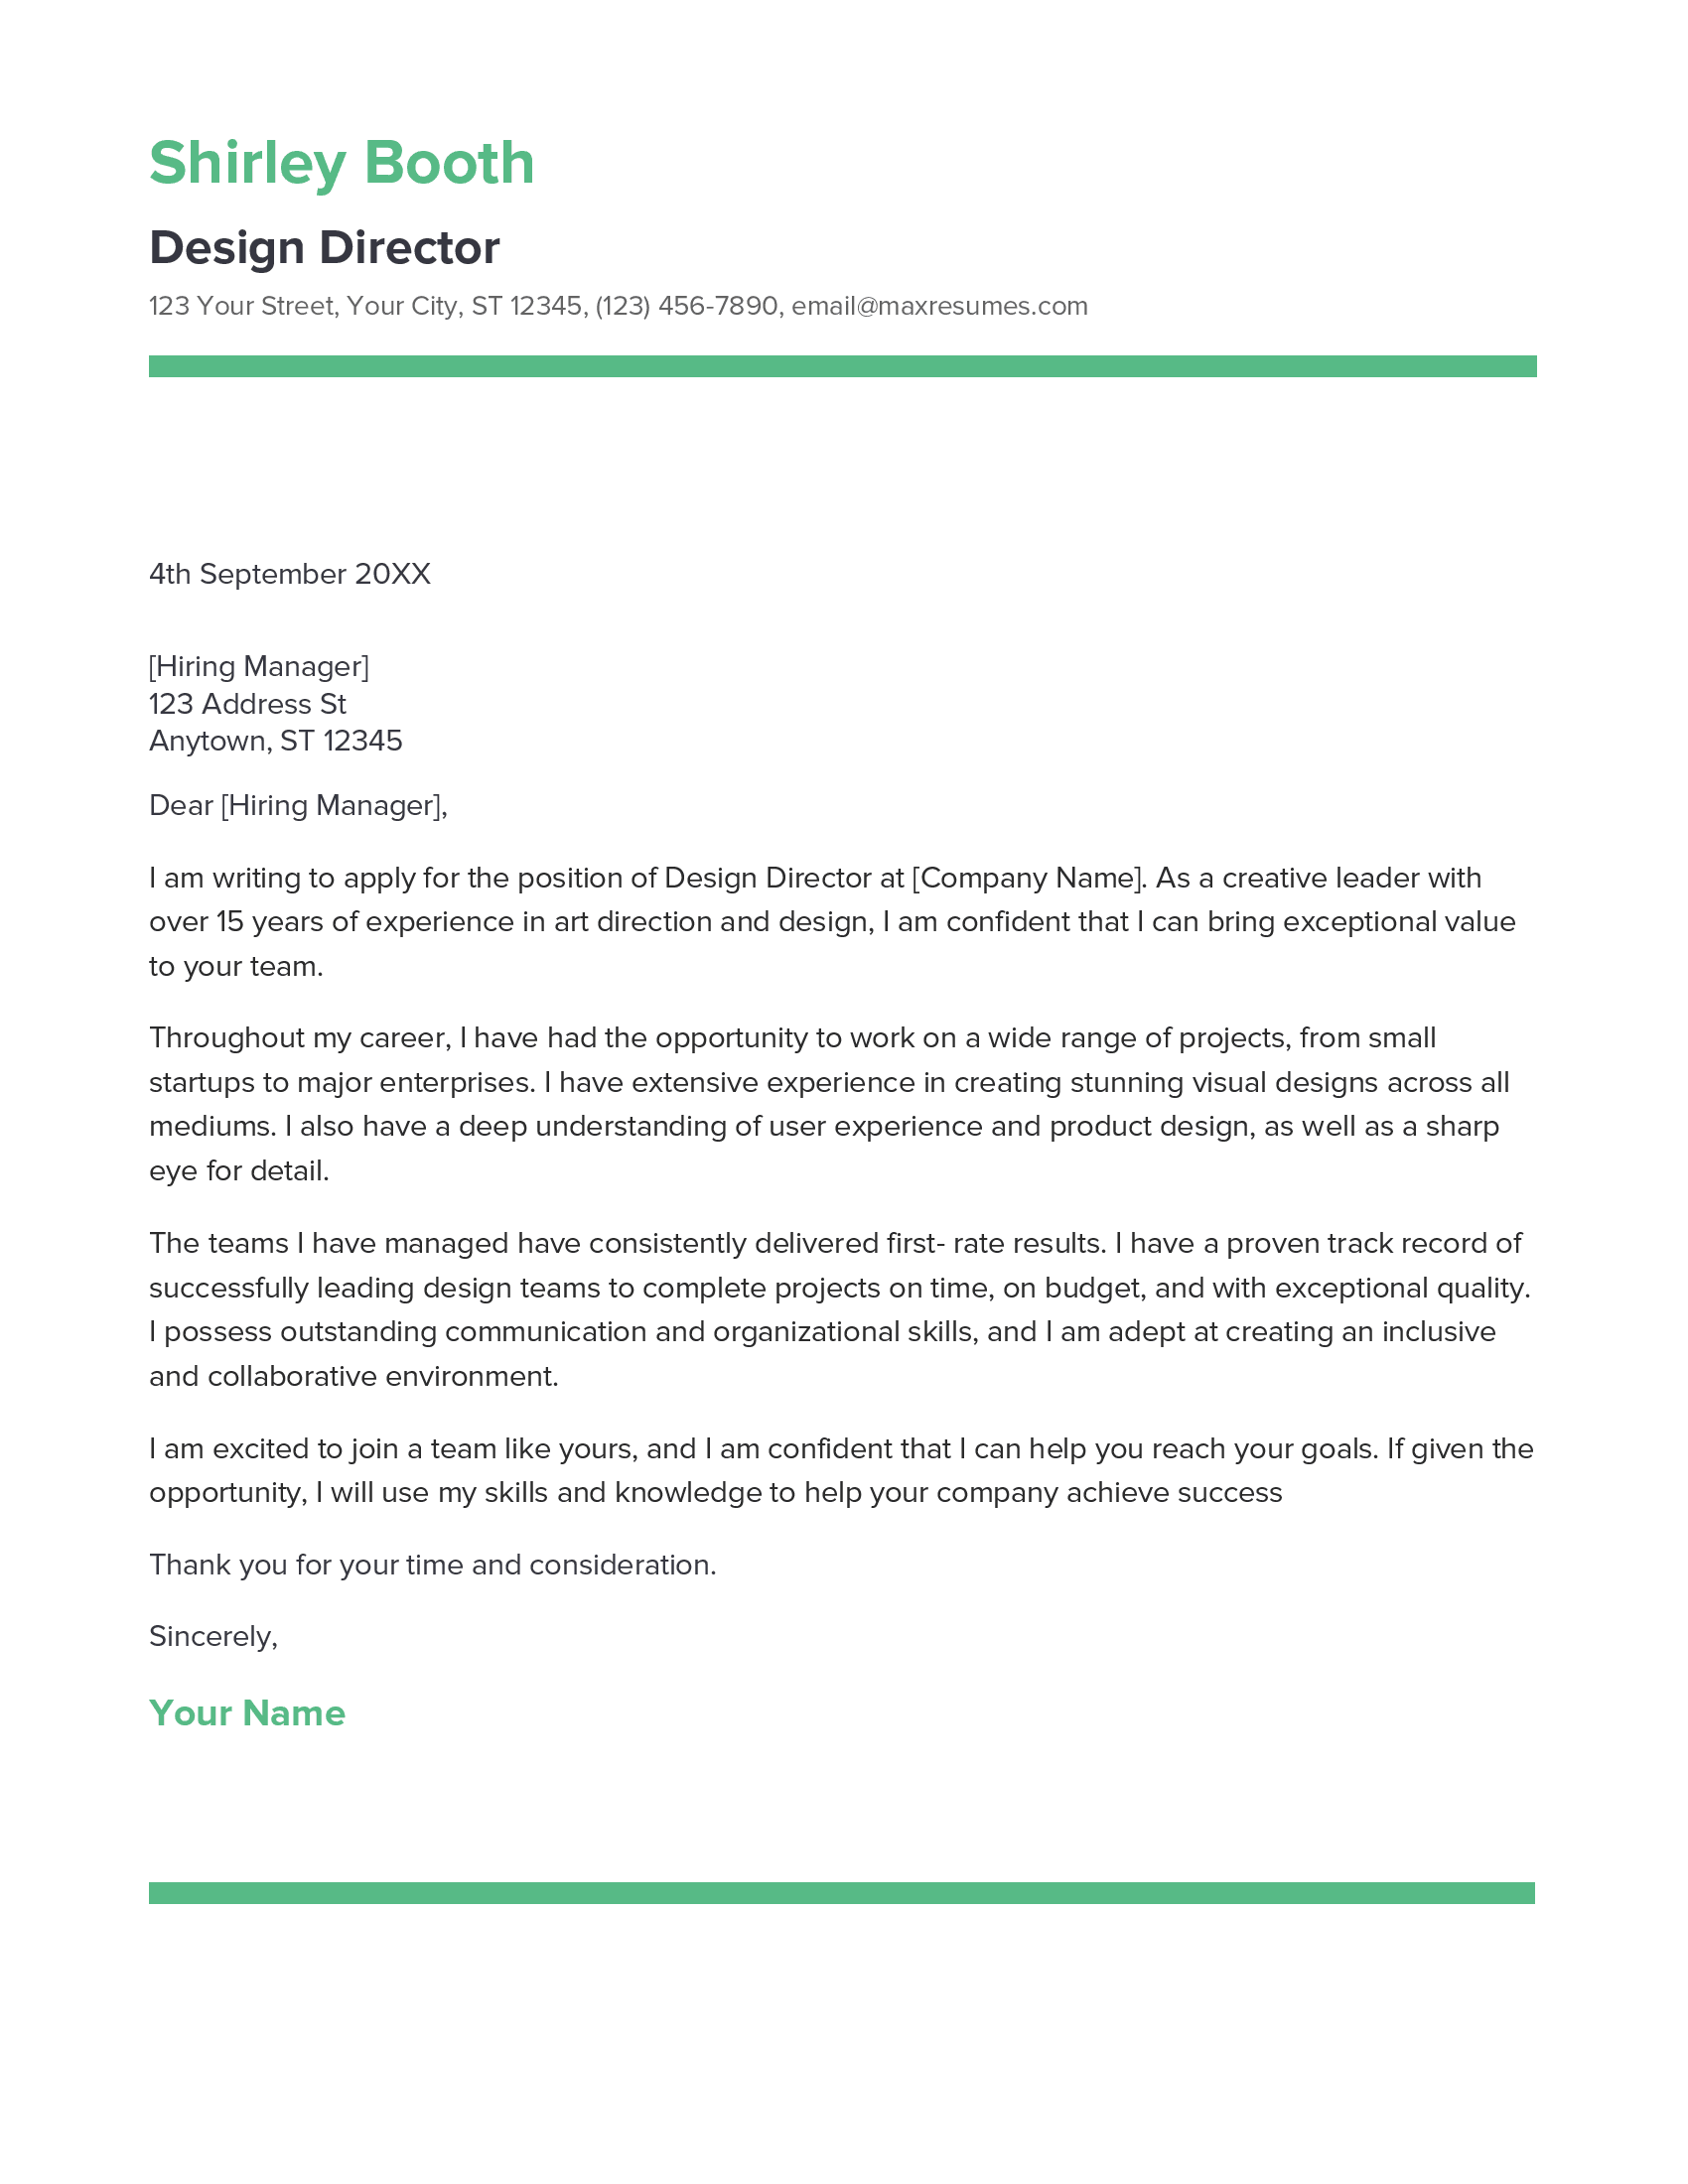 Design Director Cover Letter Example